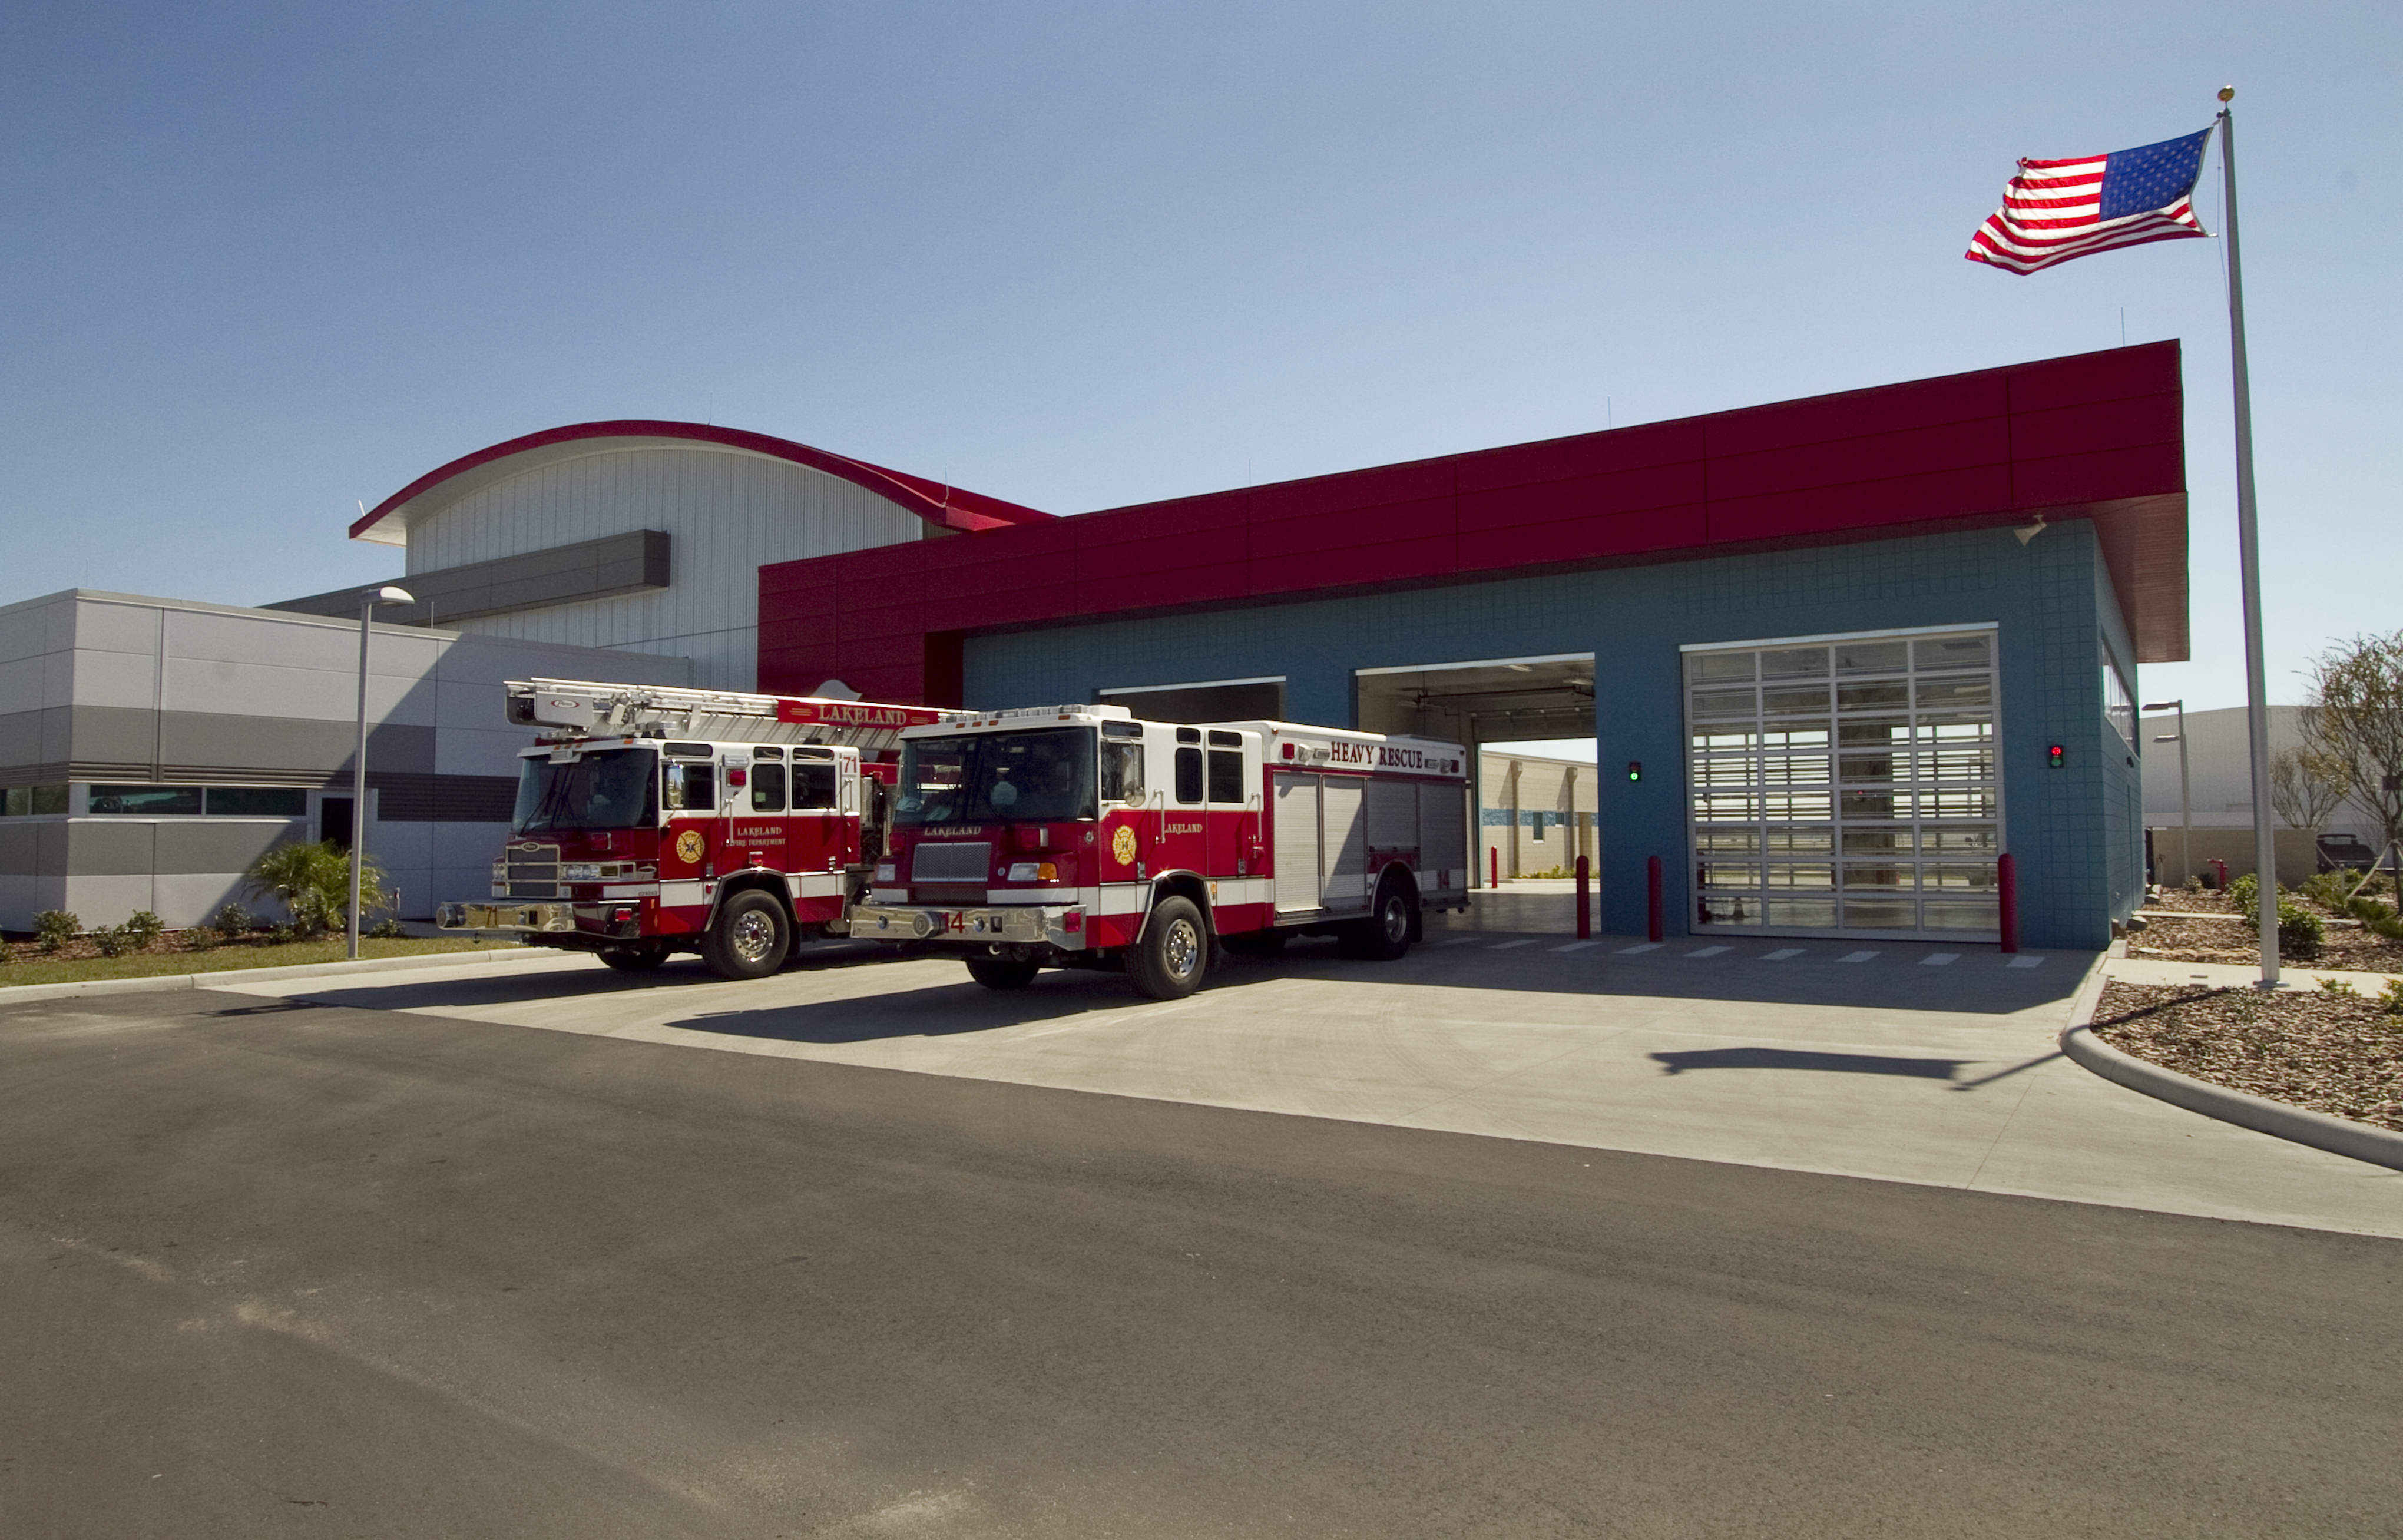 A picture of Lakeland fire station 7